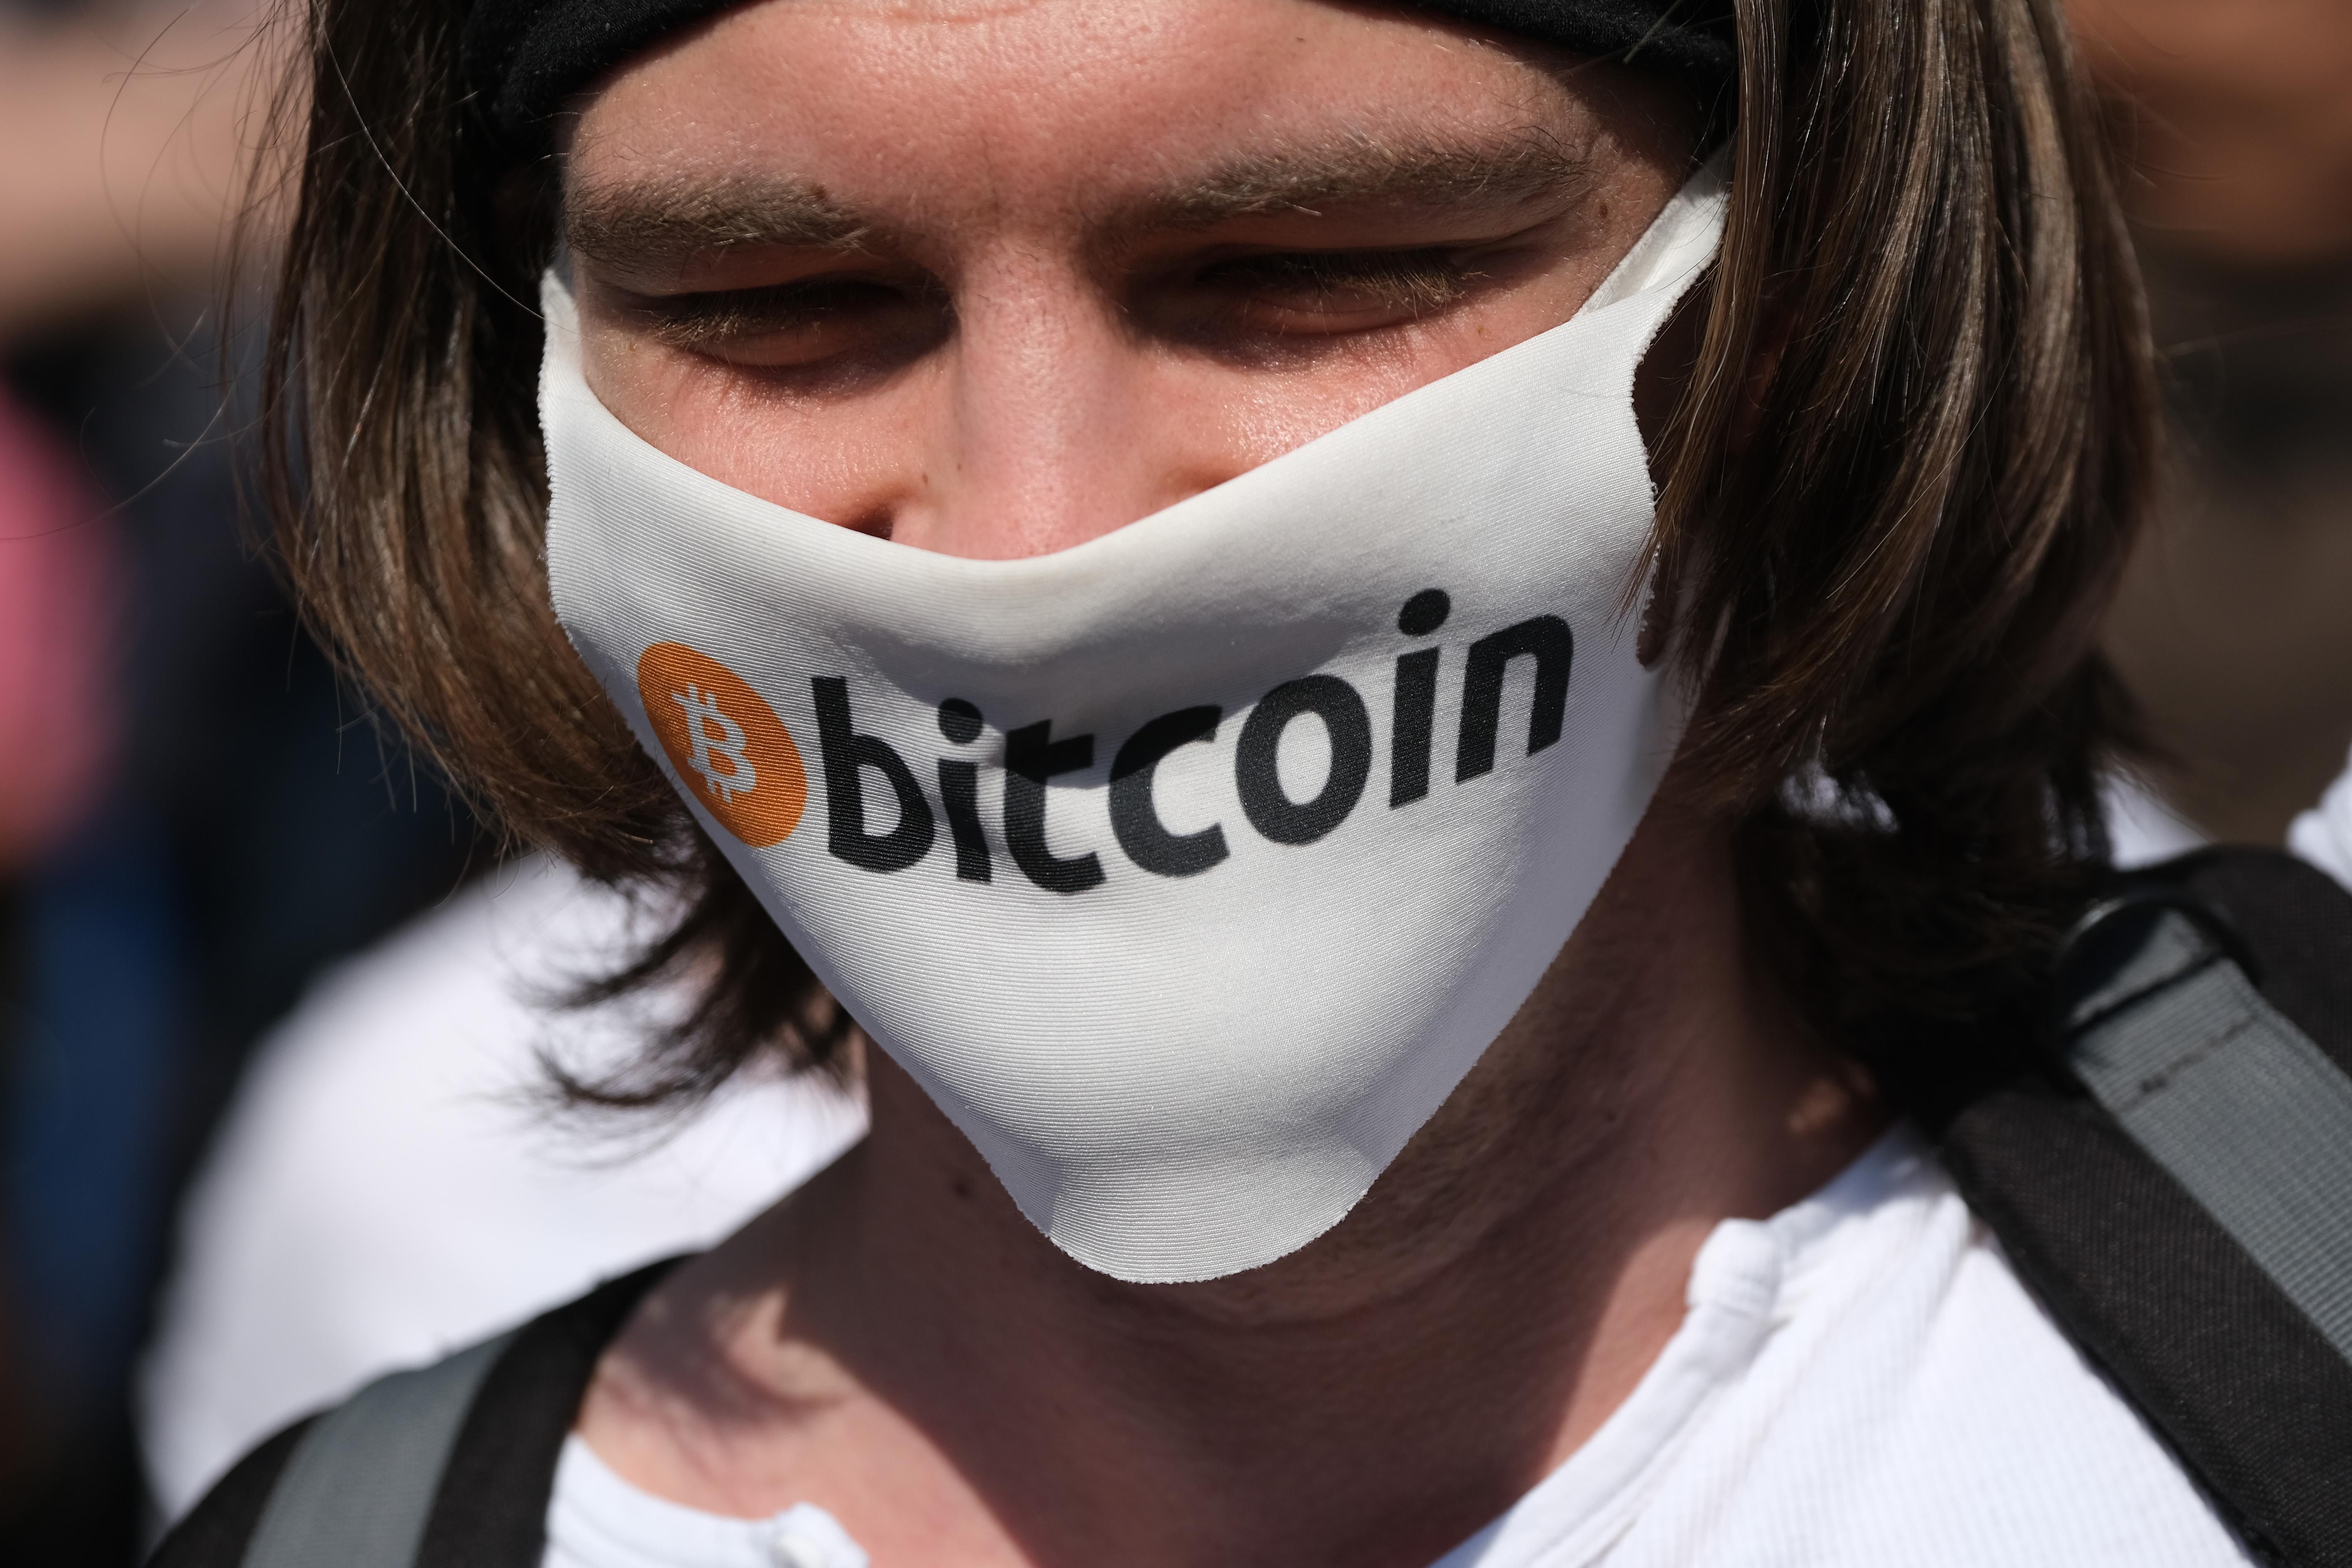  A man wears a mask with the Bitcoin logo .